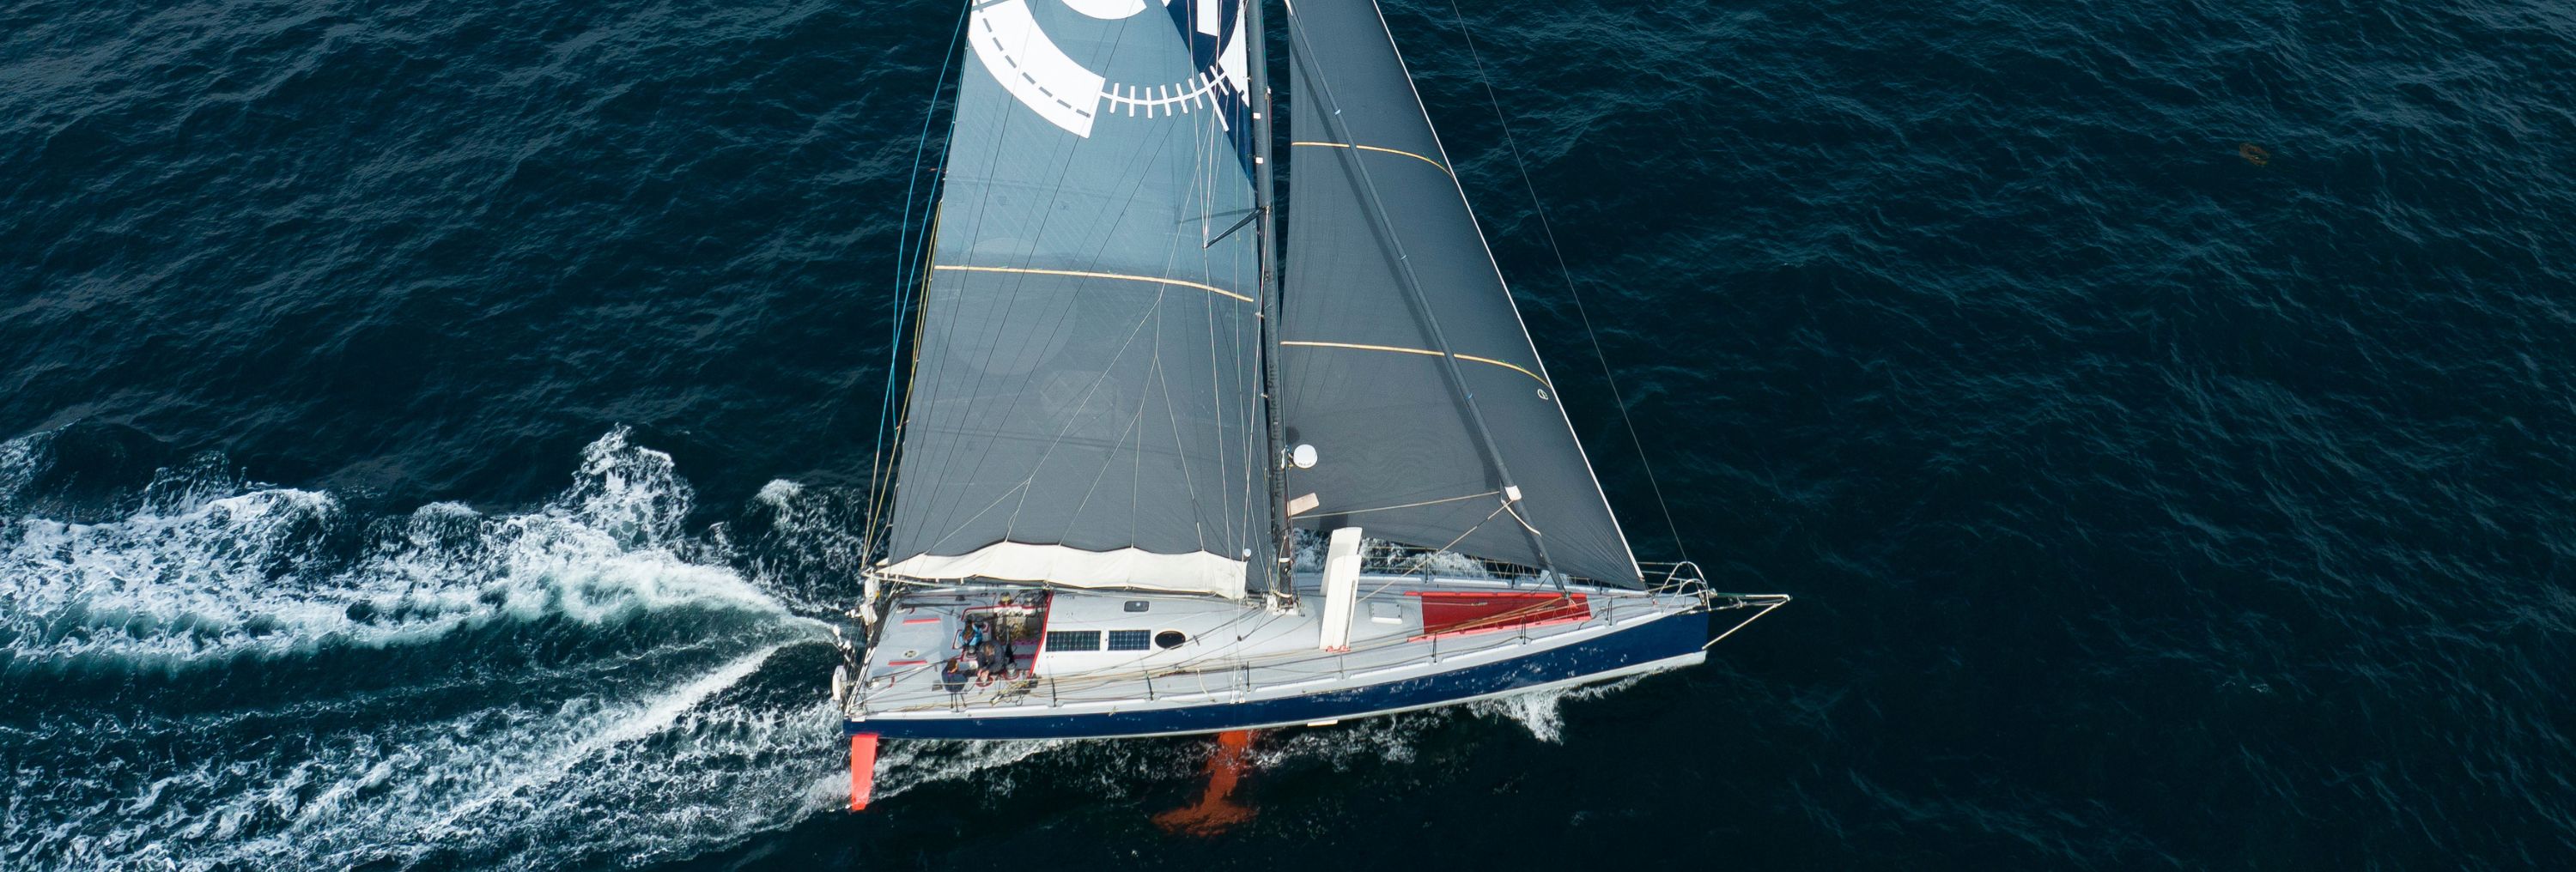 LE PINGOUIN: New Sailing yacht for sale!